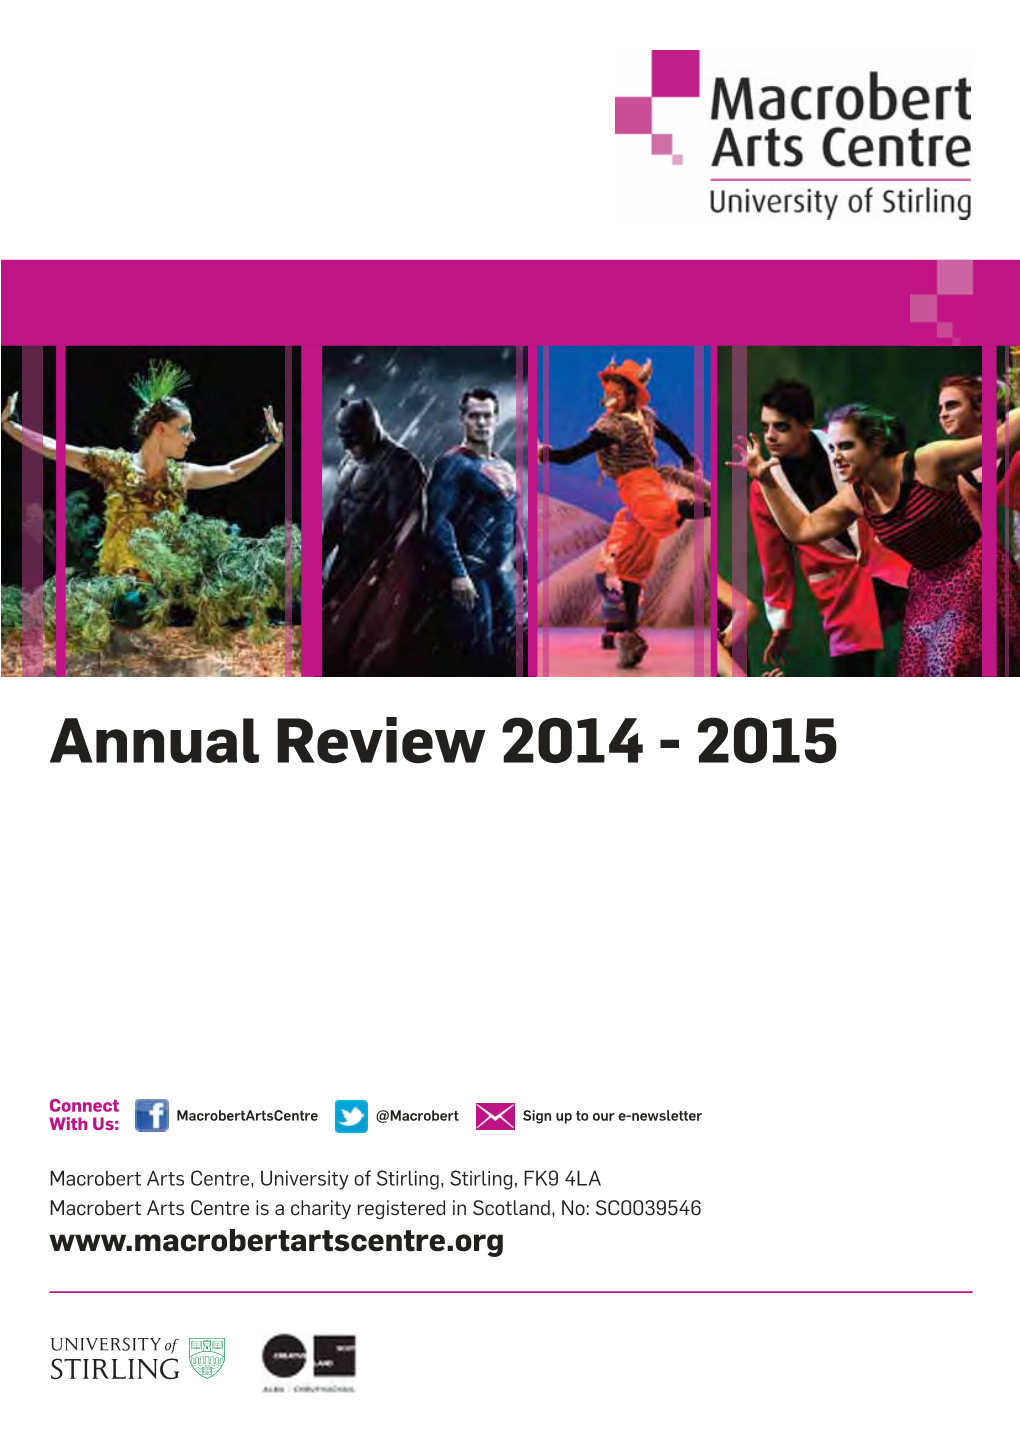 Annual Review 2014 - 2015